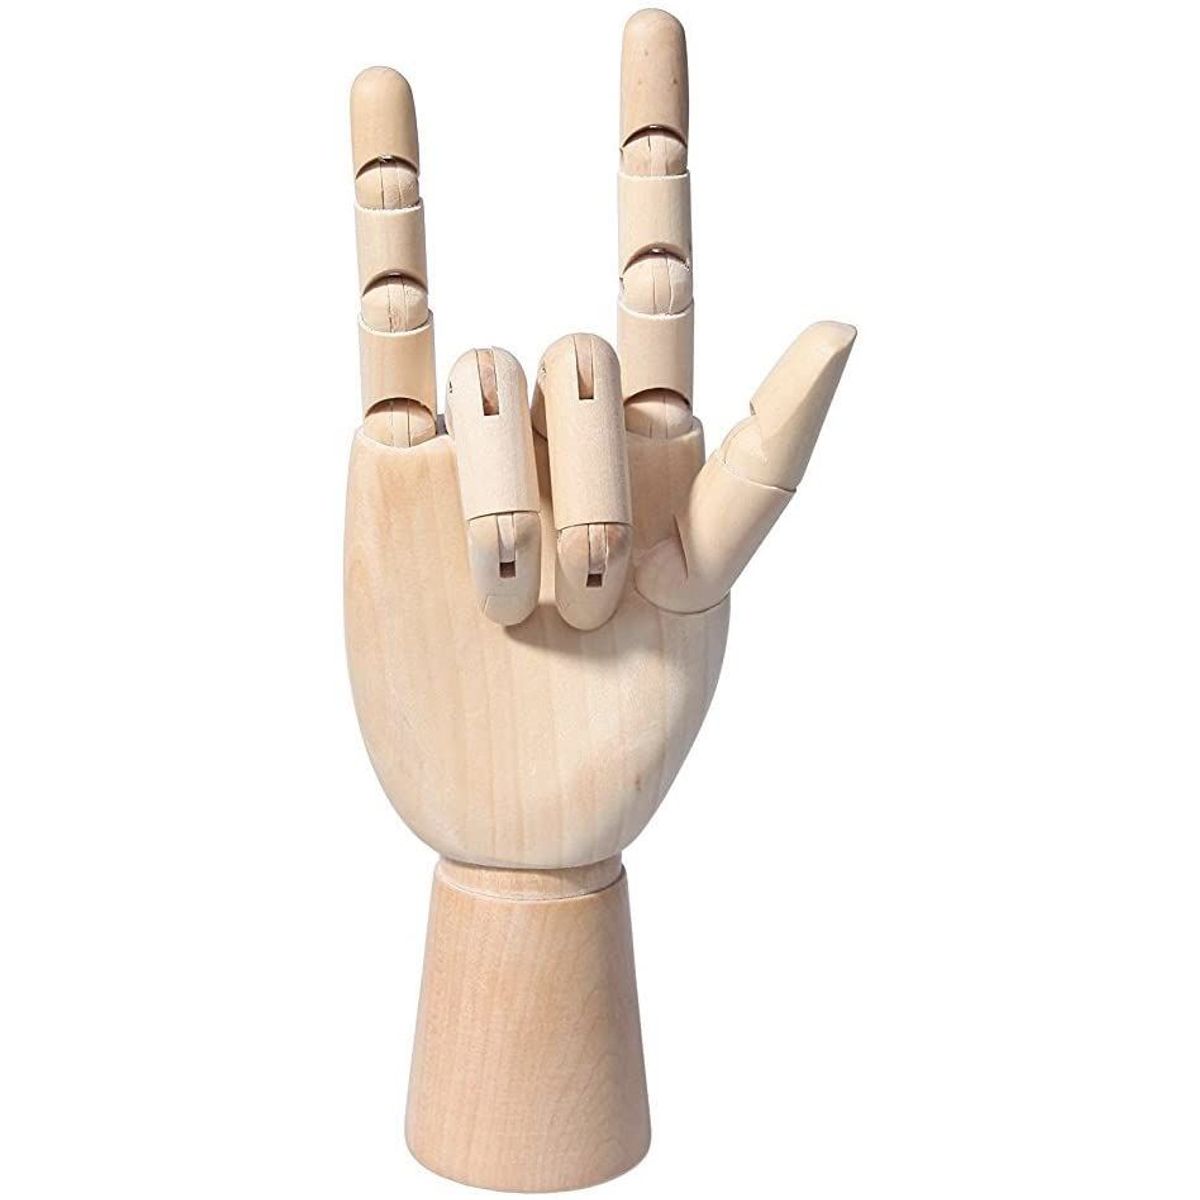 Wooden Hand,Realistic Fake Hand Statue for Artists,for Sketching, School  Practice, Jewelry Display,Detailed Artistic Hand Statue,7 Inch(Right)